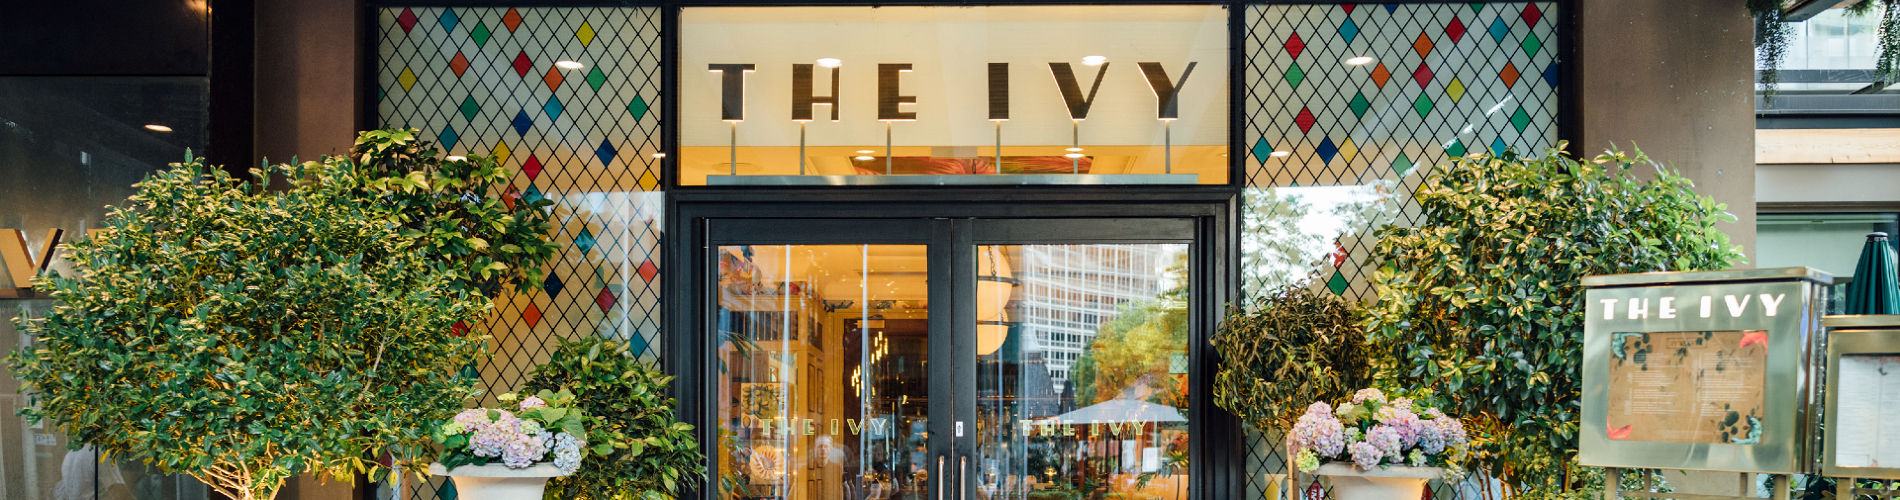 The Ivy restaurant in Manchester City Centre